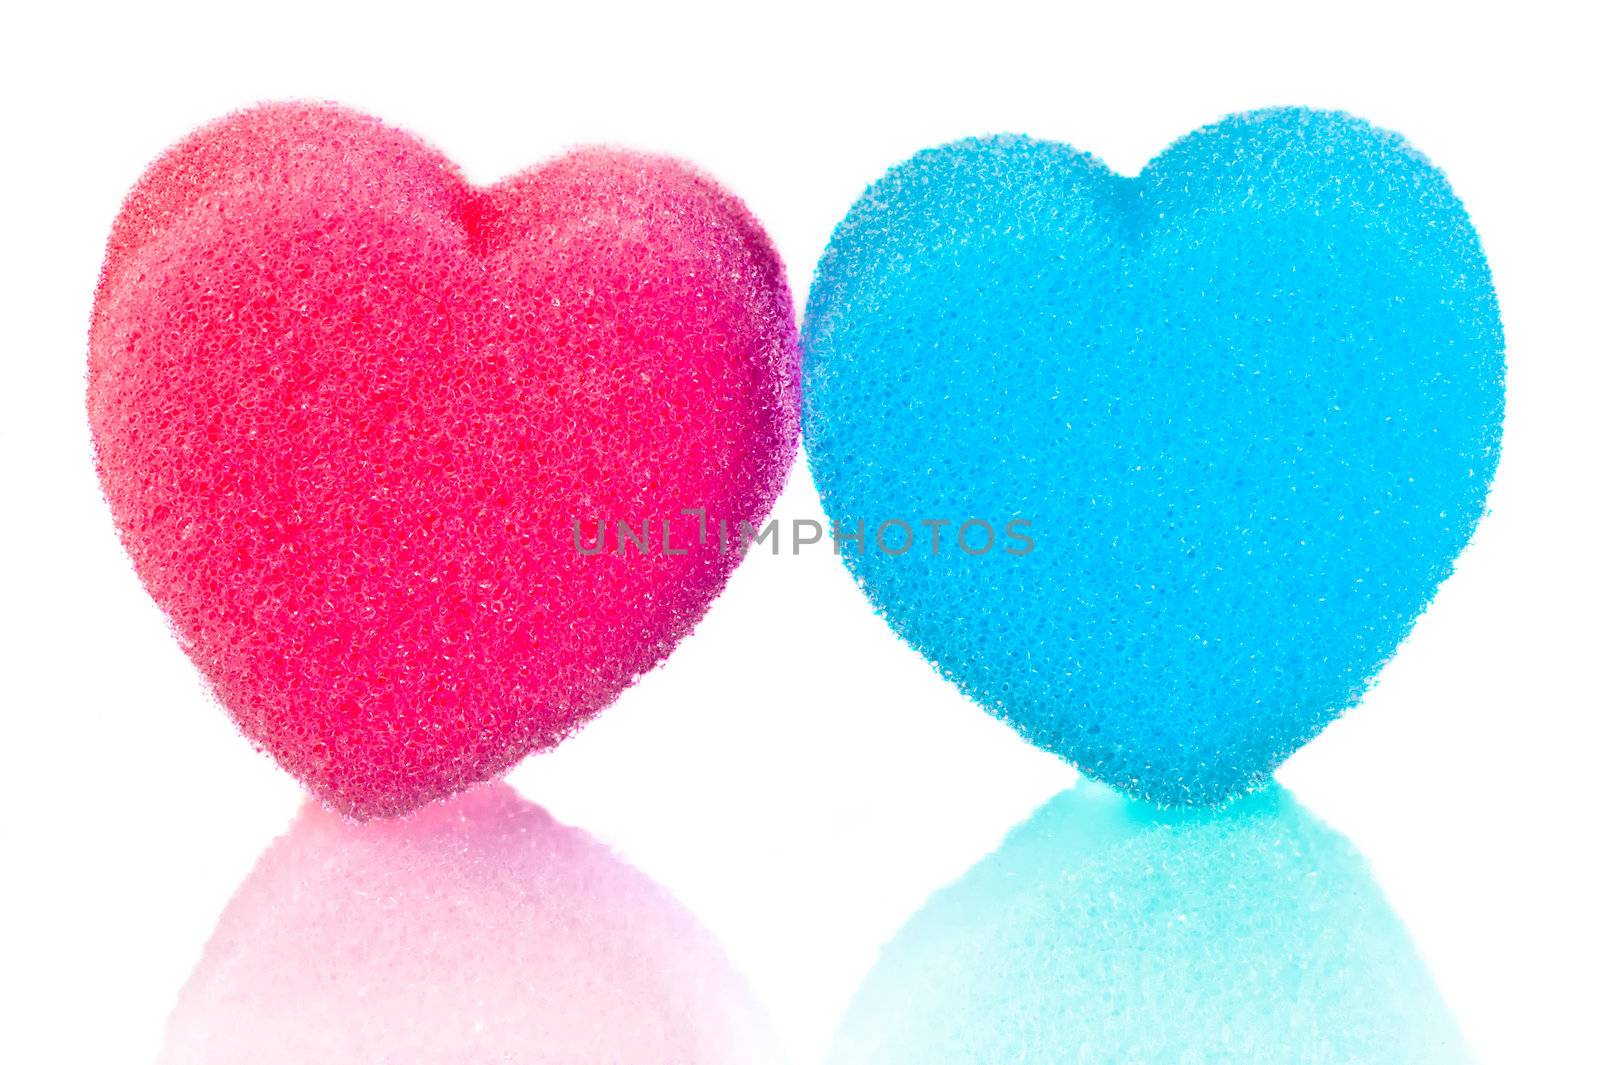 Two hearts of blue and pink lips on a white background